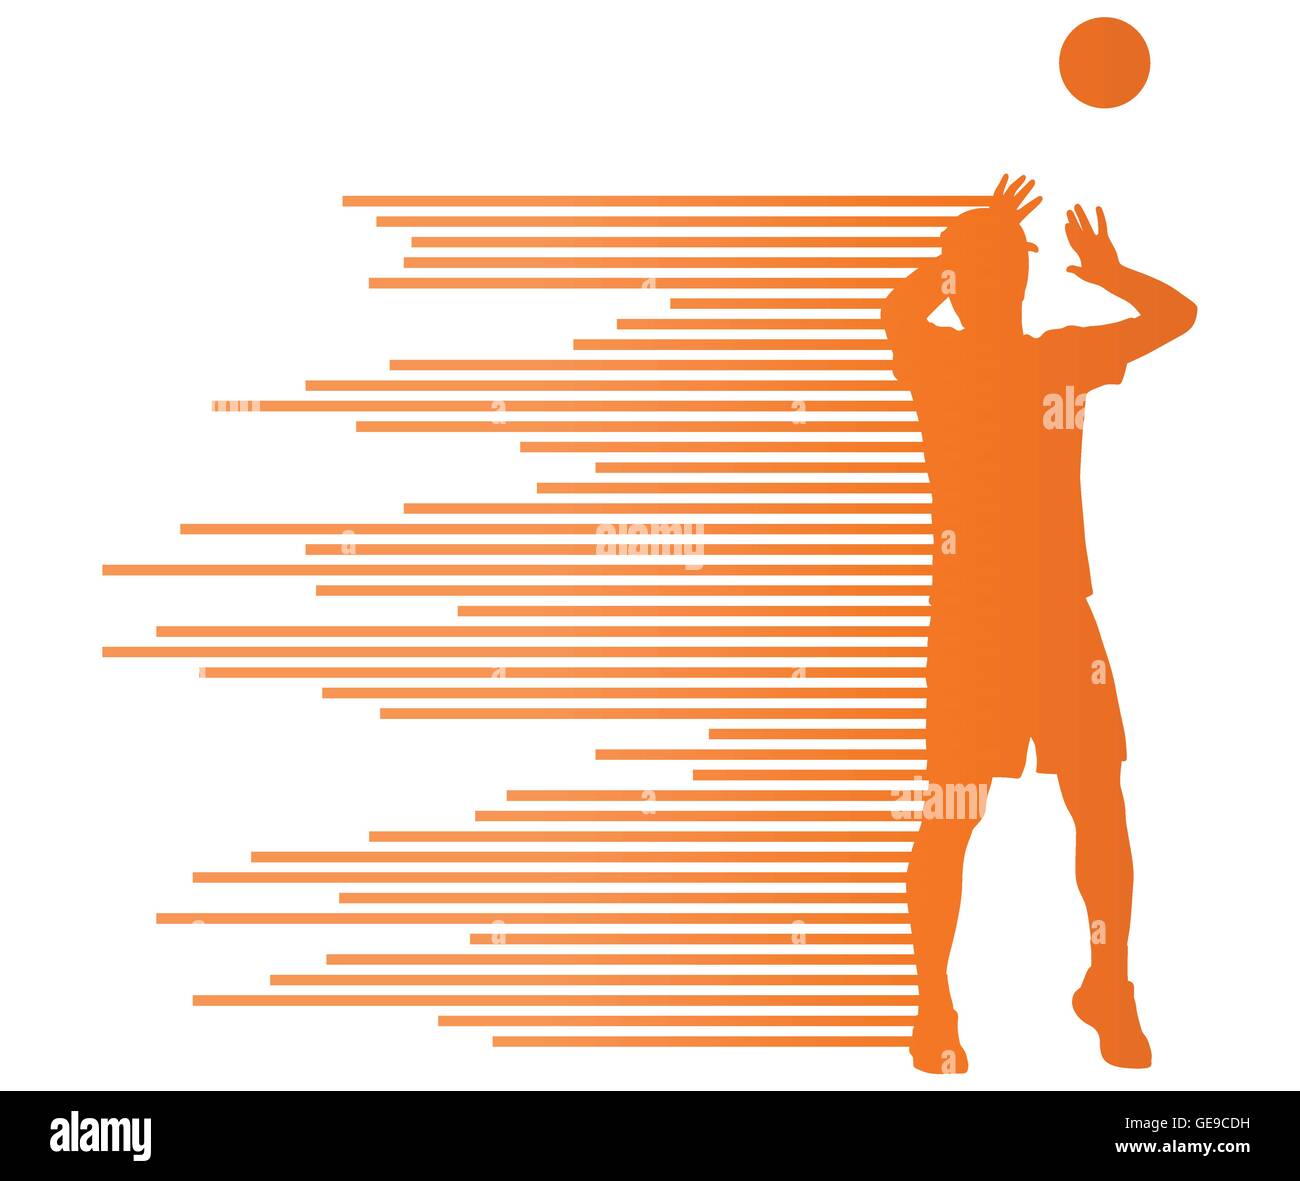 Volleyball player vector silhouette background concept made of stripes Stock Vector